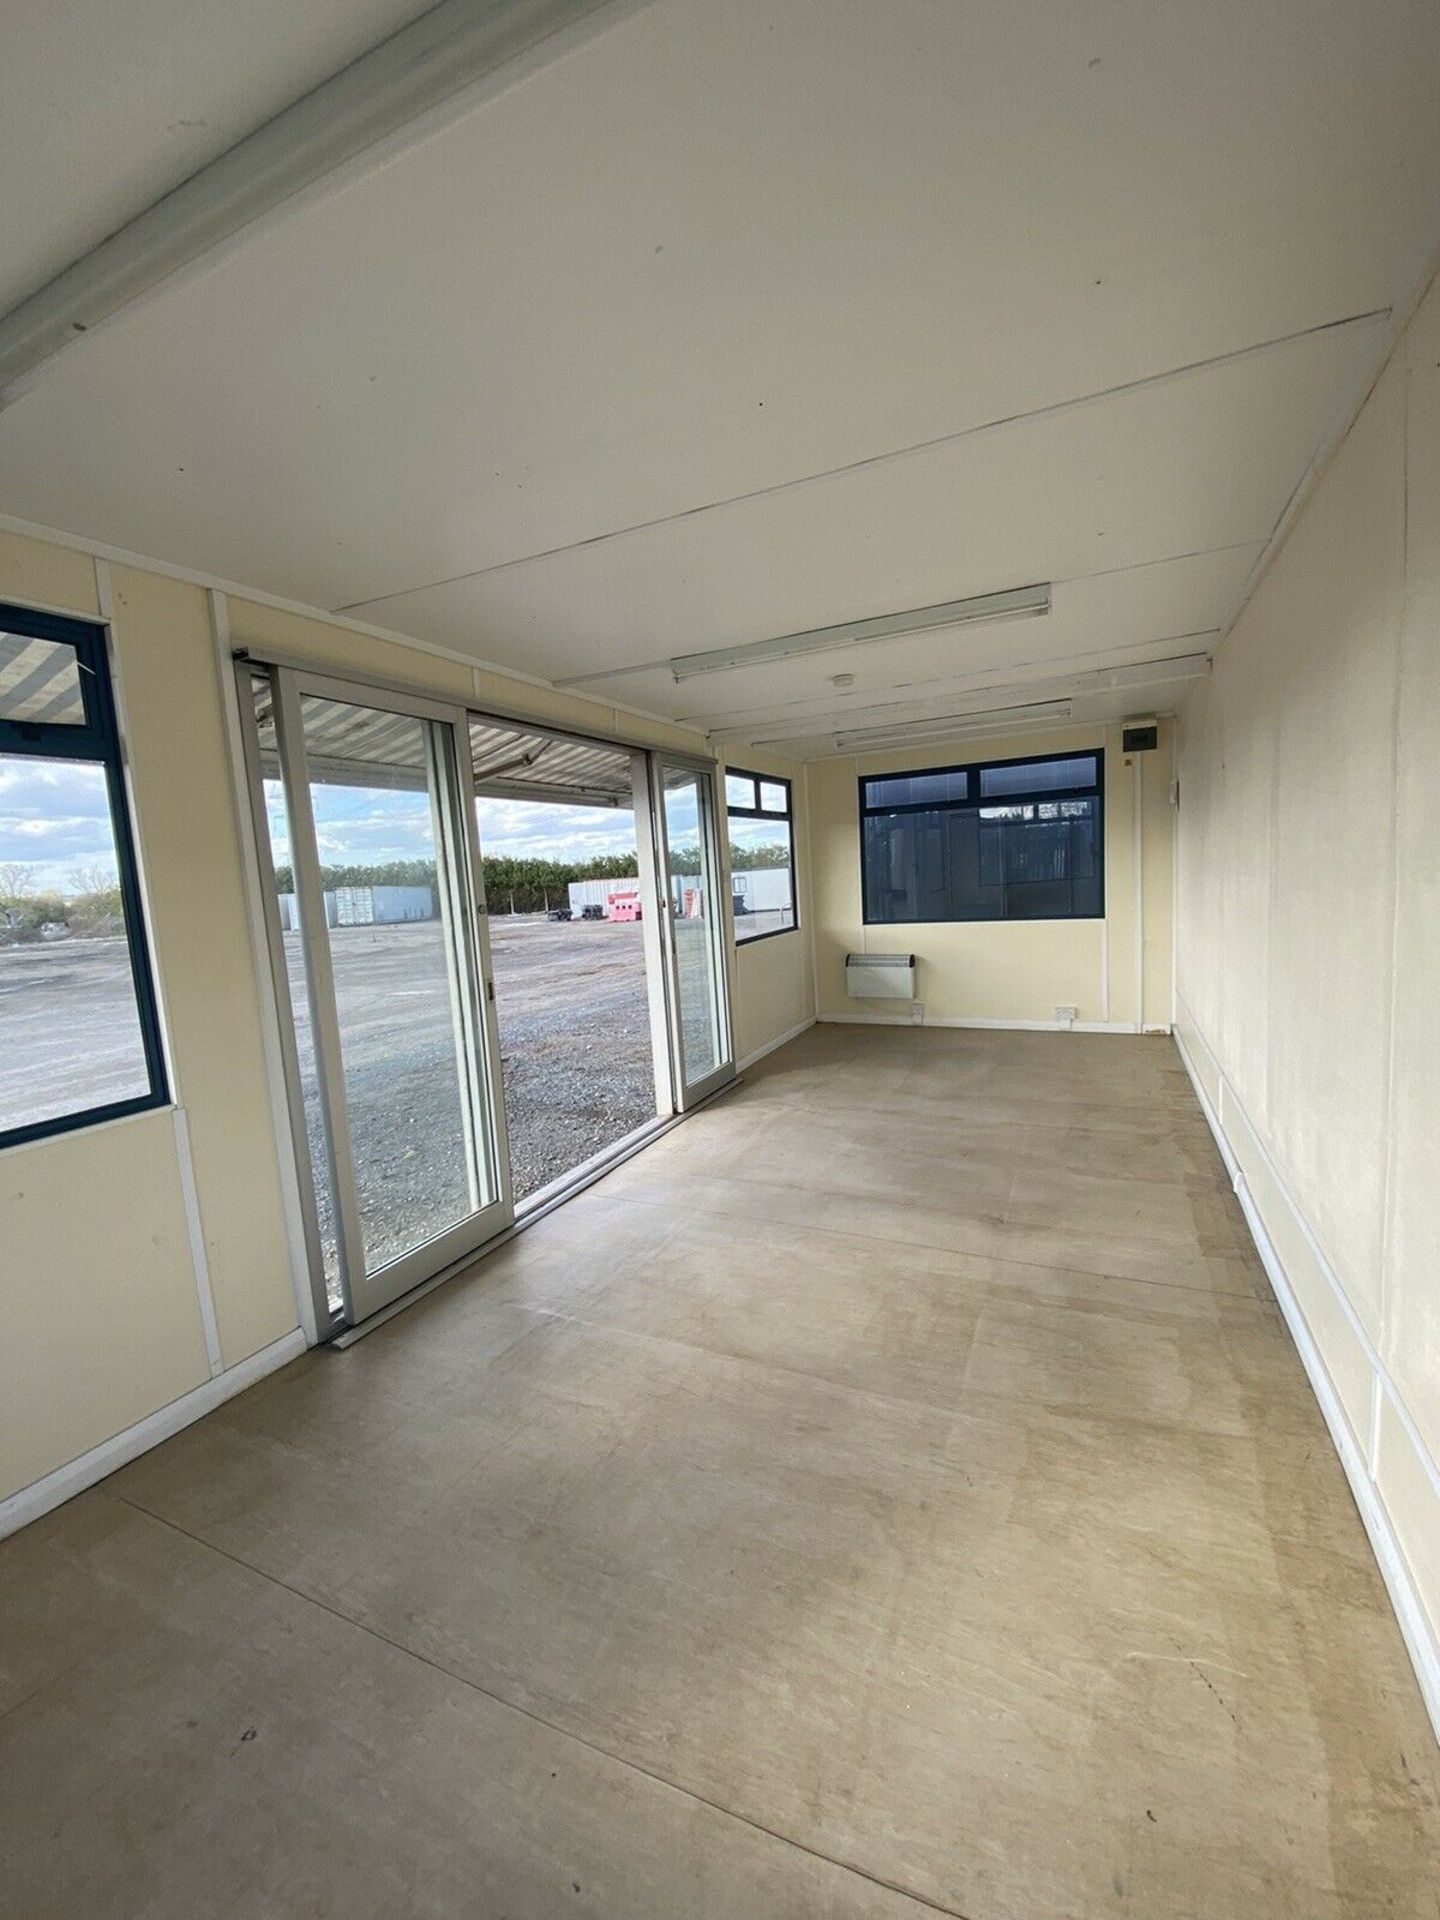 24ft Marketing Suite, Sales Centre Office - Image 8 of 12